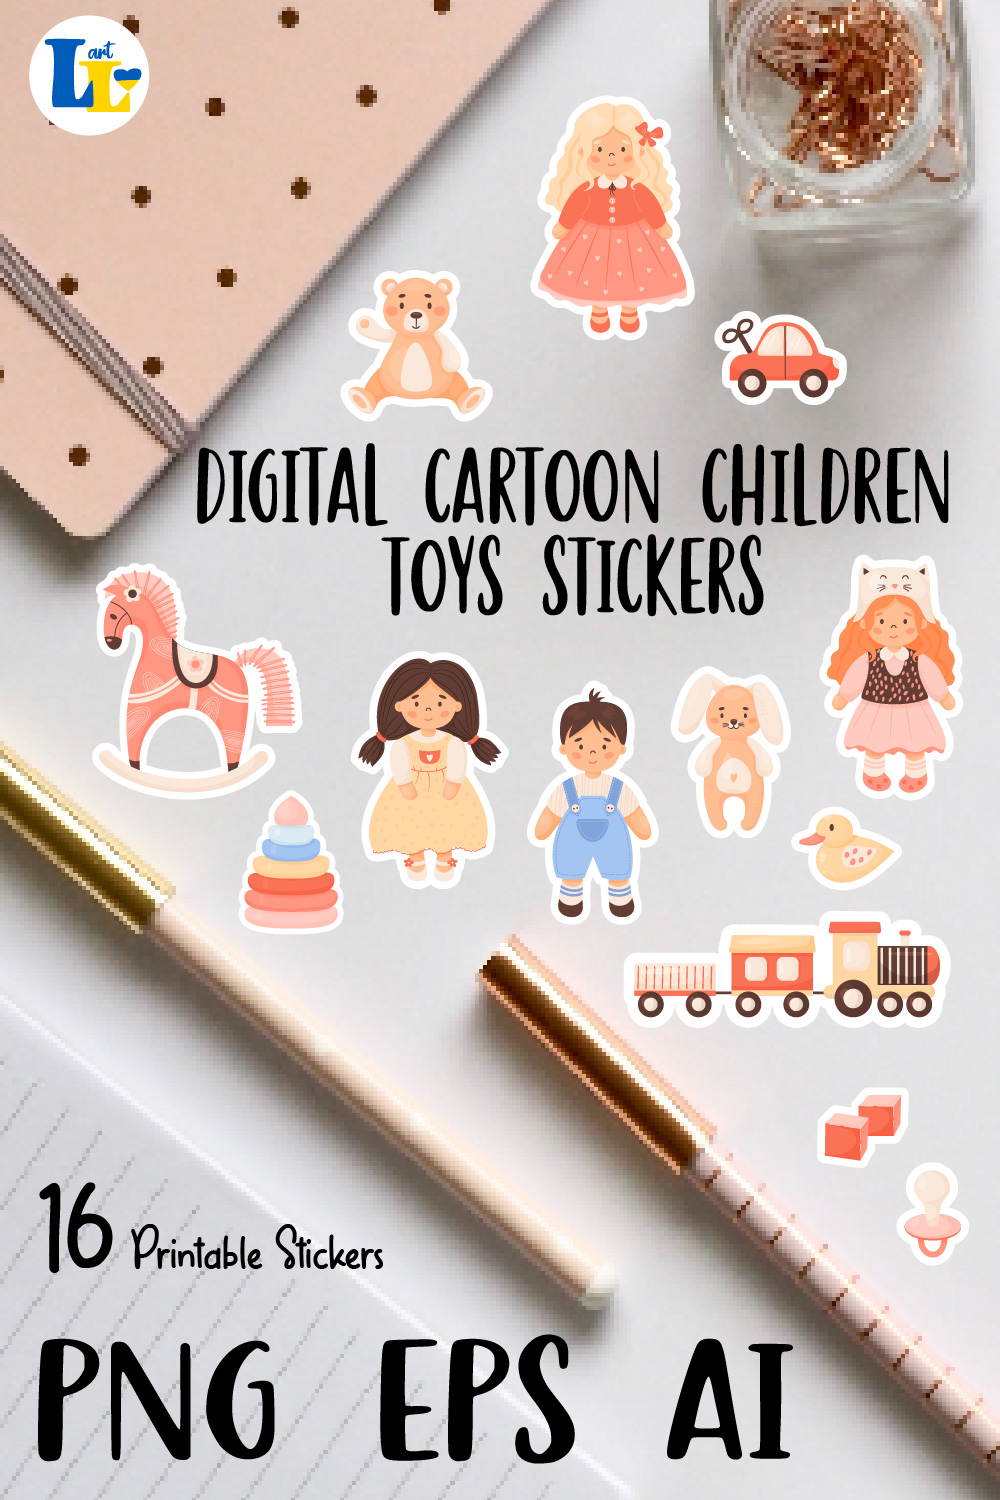 Printable stickers Cute children toys, doll, plush toys pinterest preview image.